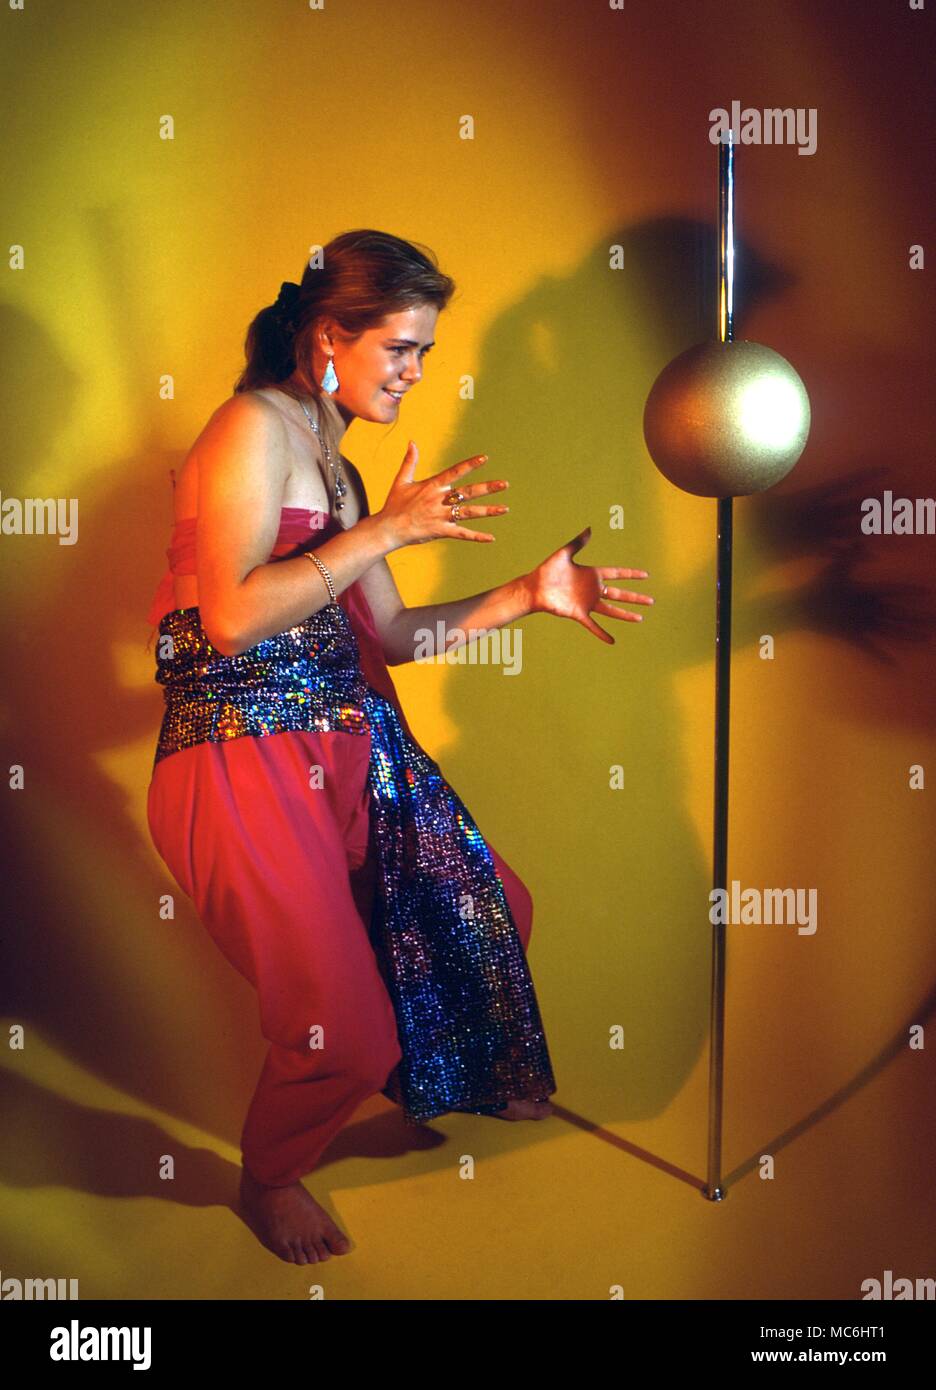 Stage Magic - The Animated Ball. The girl shows that the ball has a hole through it. She slips it over the pole and it slides to the floor. Slowly, under her mesmerizing influence, the ball rises and falls to her command. Stock Photo